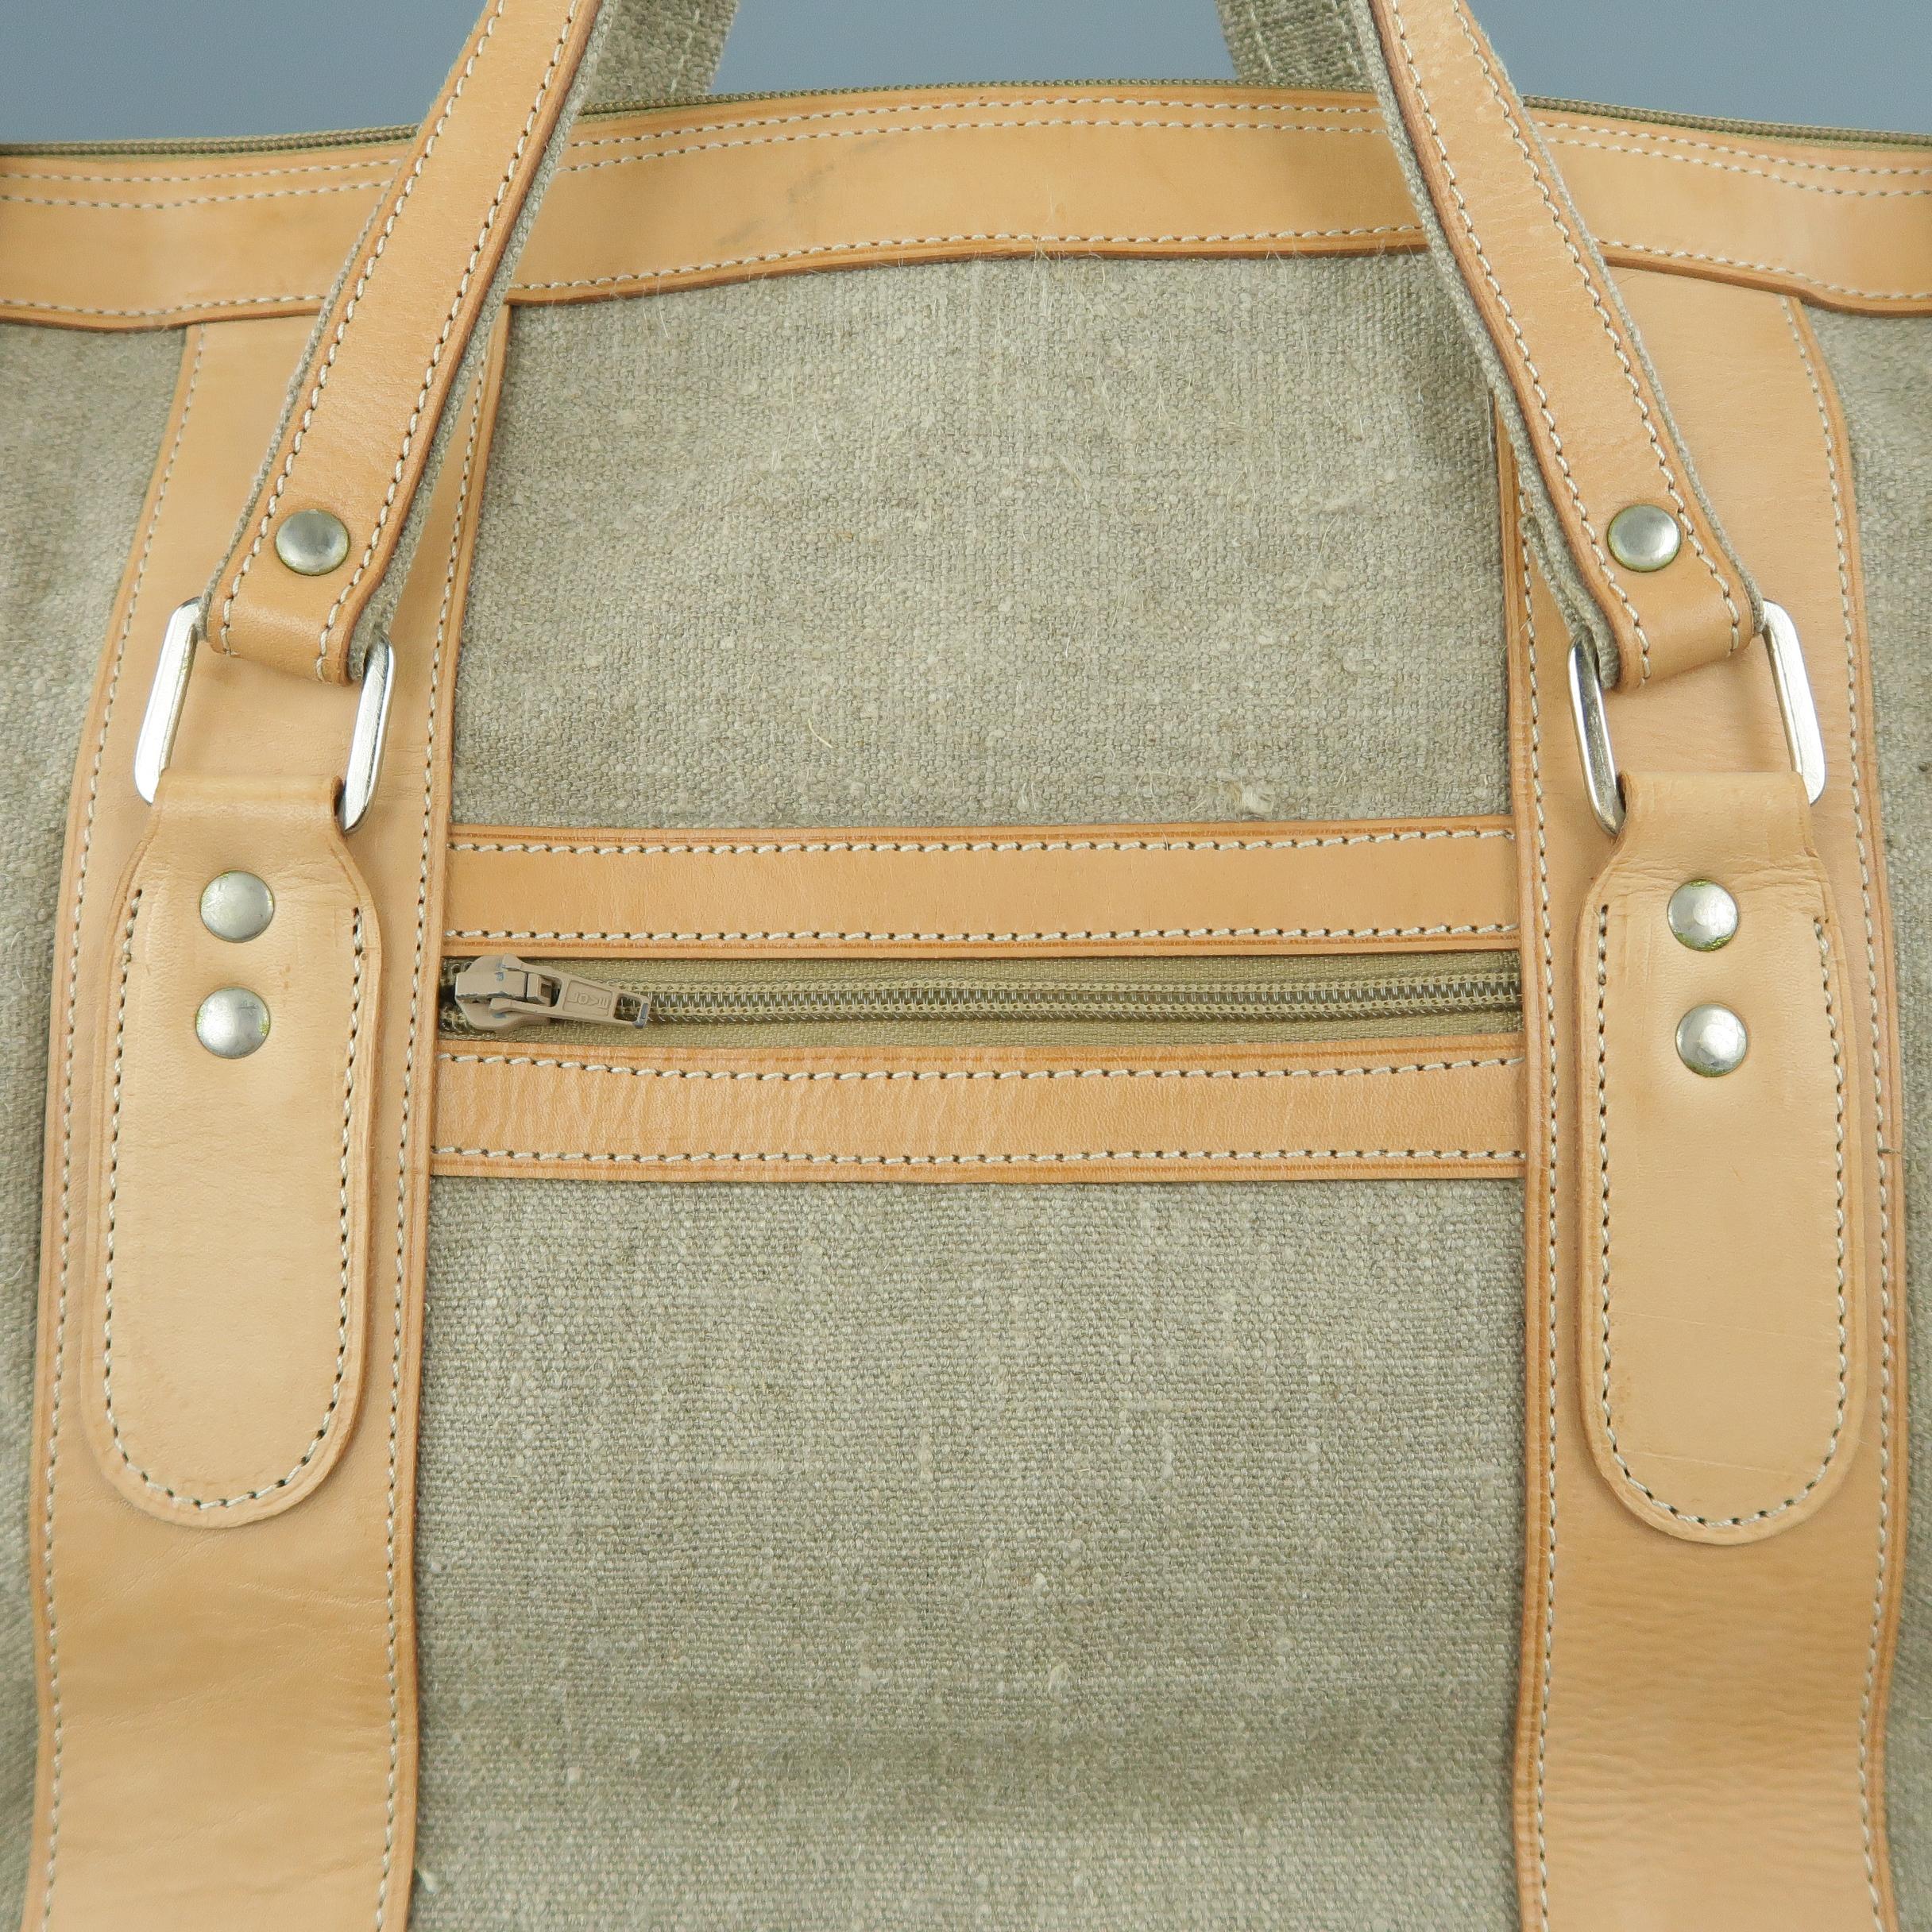 EUROPEN NATURAL LEATHER BAG of LOS ANGELES weekender travel bag comes in gray textured canvas with natural vachetta beige leather details, double top handles, and top zip closure with double buckle straps. Made in Poland.
 
Very Good Pre-Owned